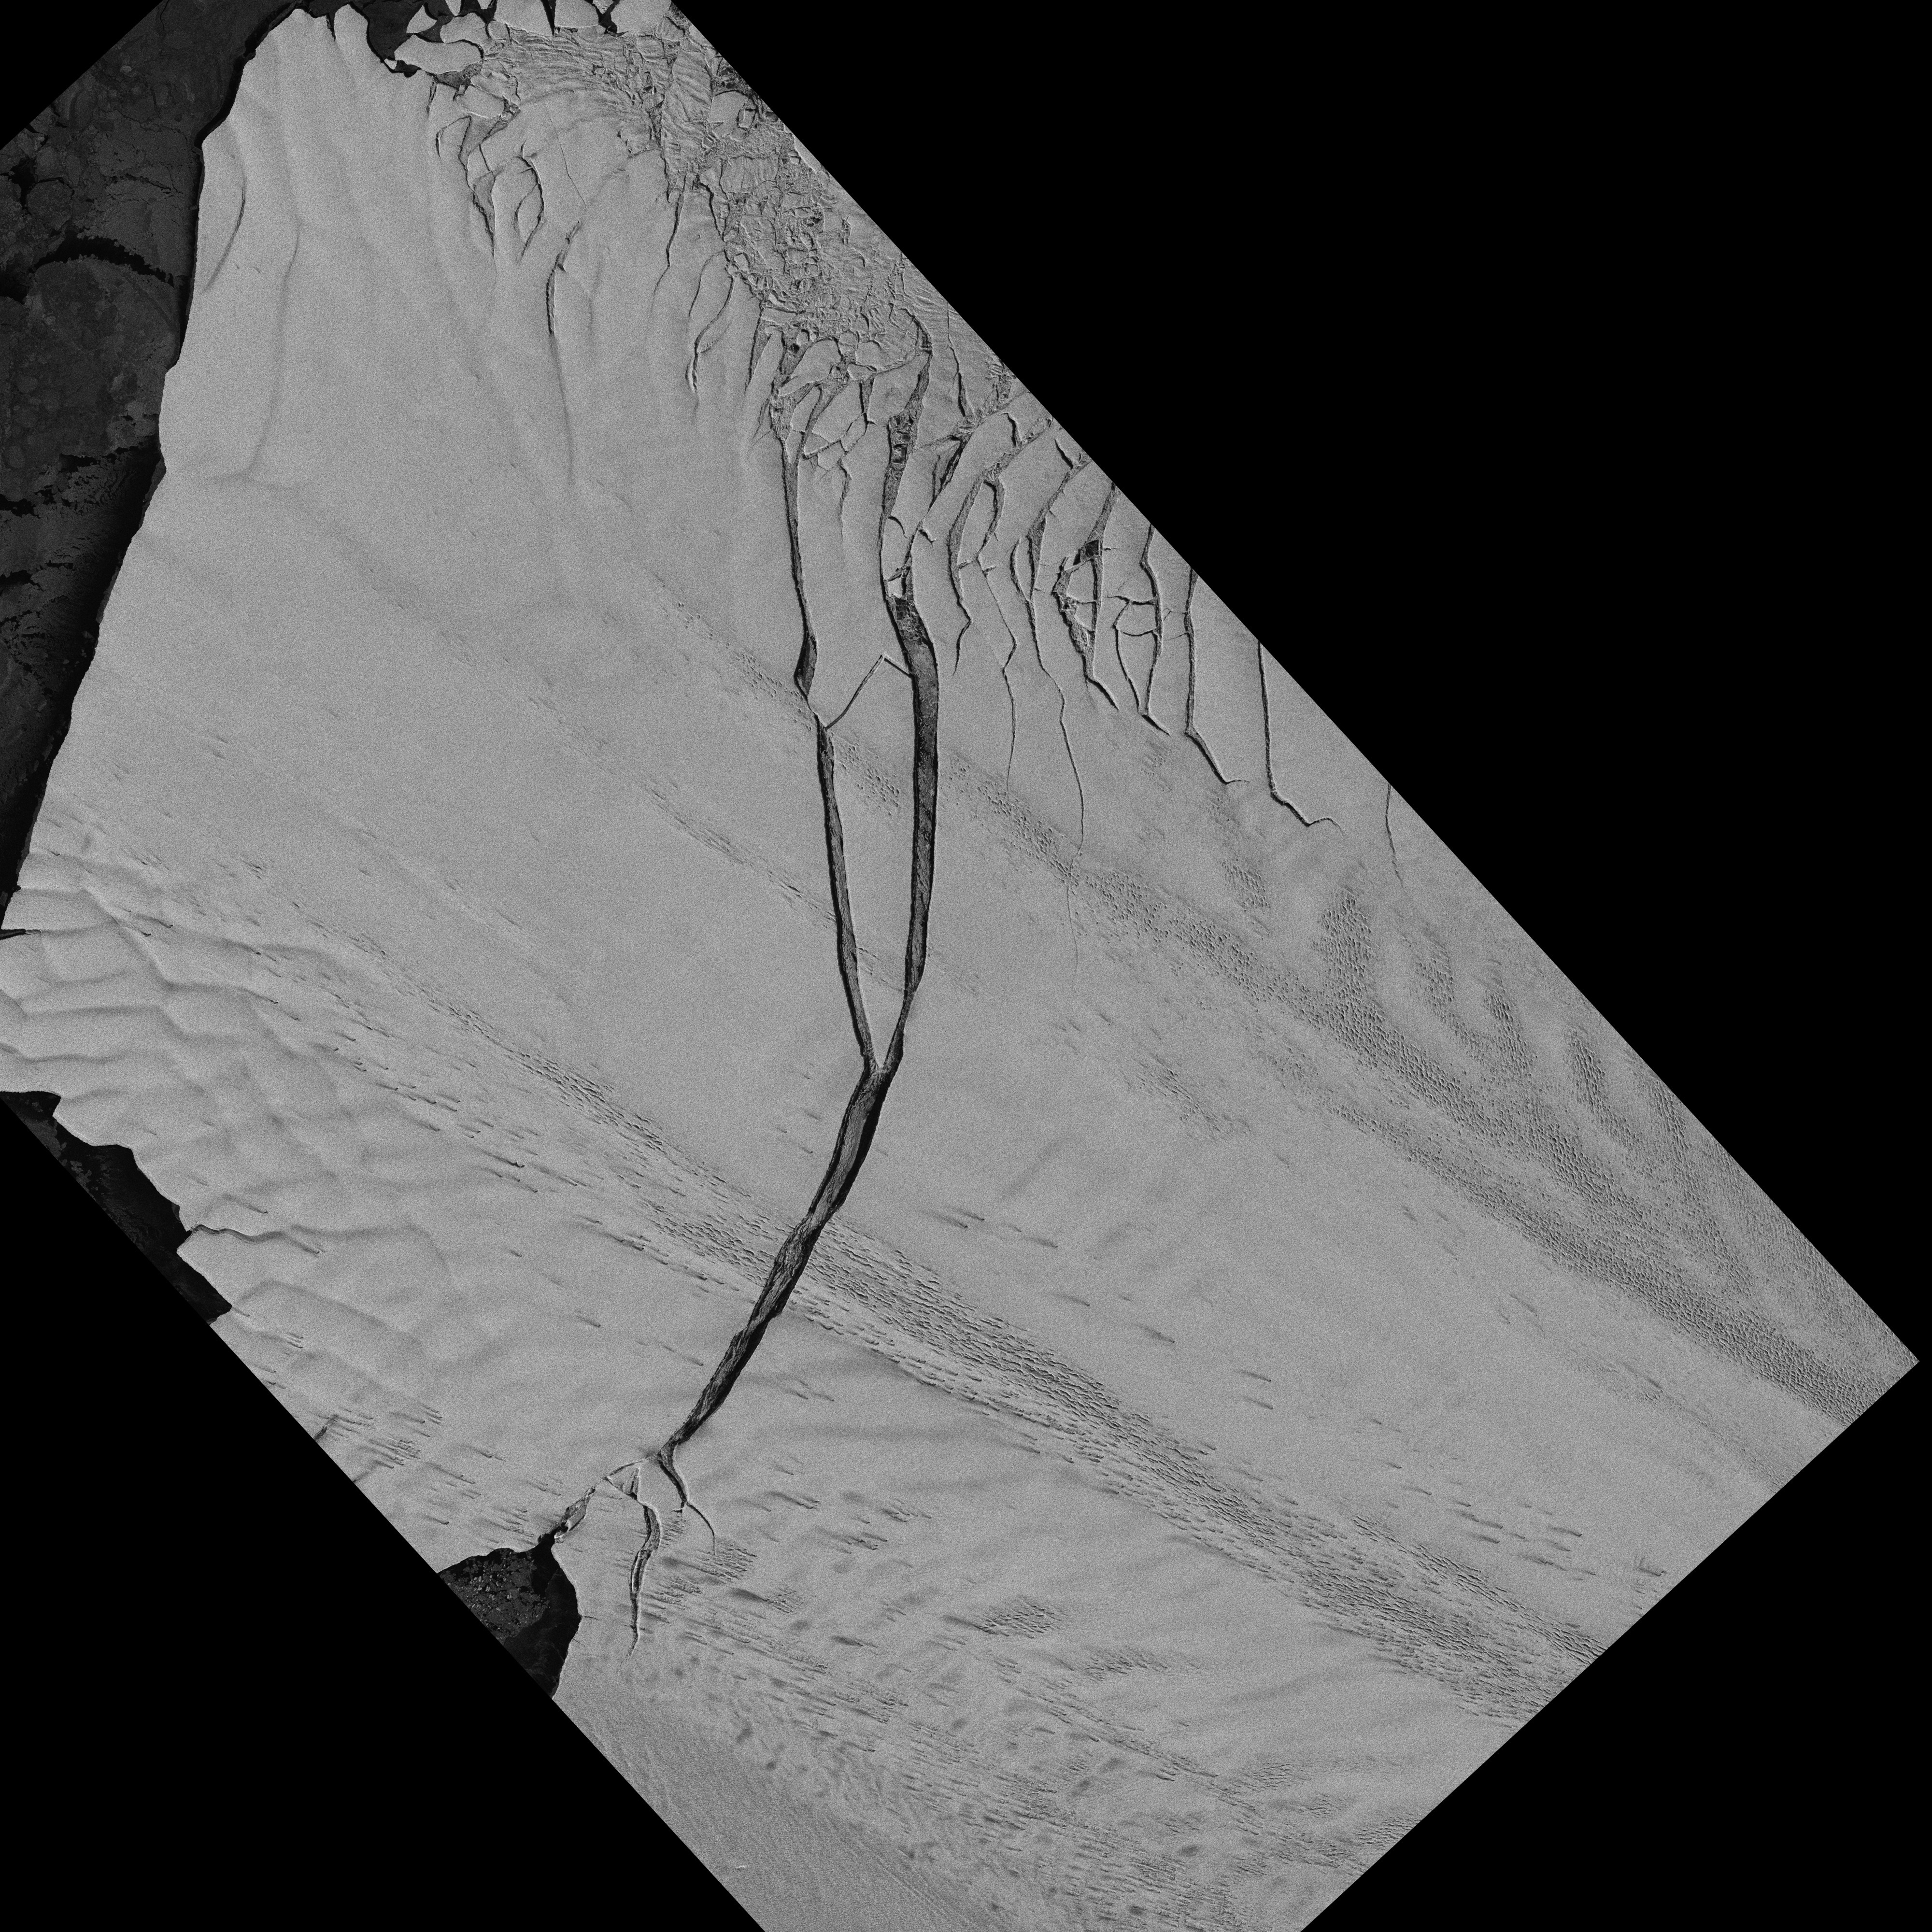 Image of the Pine Island Glacier ice shelf from the German Aerospace Center Earth monitoring satellite TerraSAR-X captured on July 8, 2013. Image credit: DLR